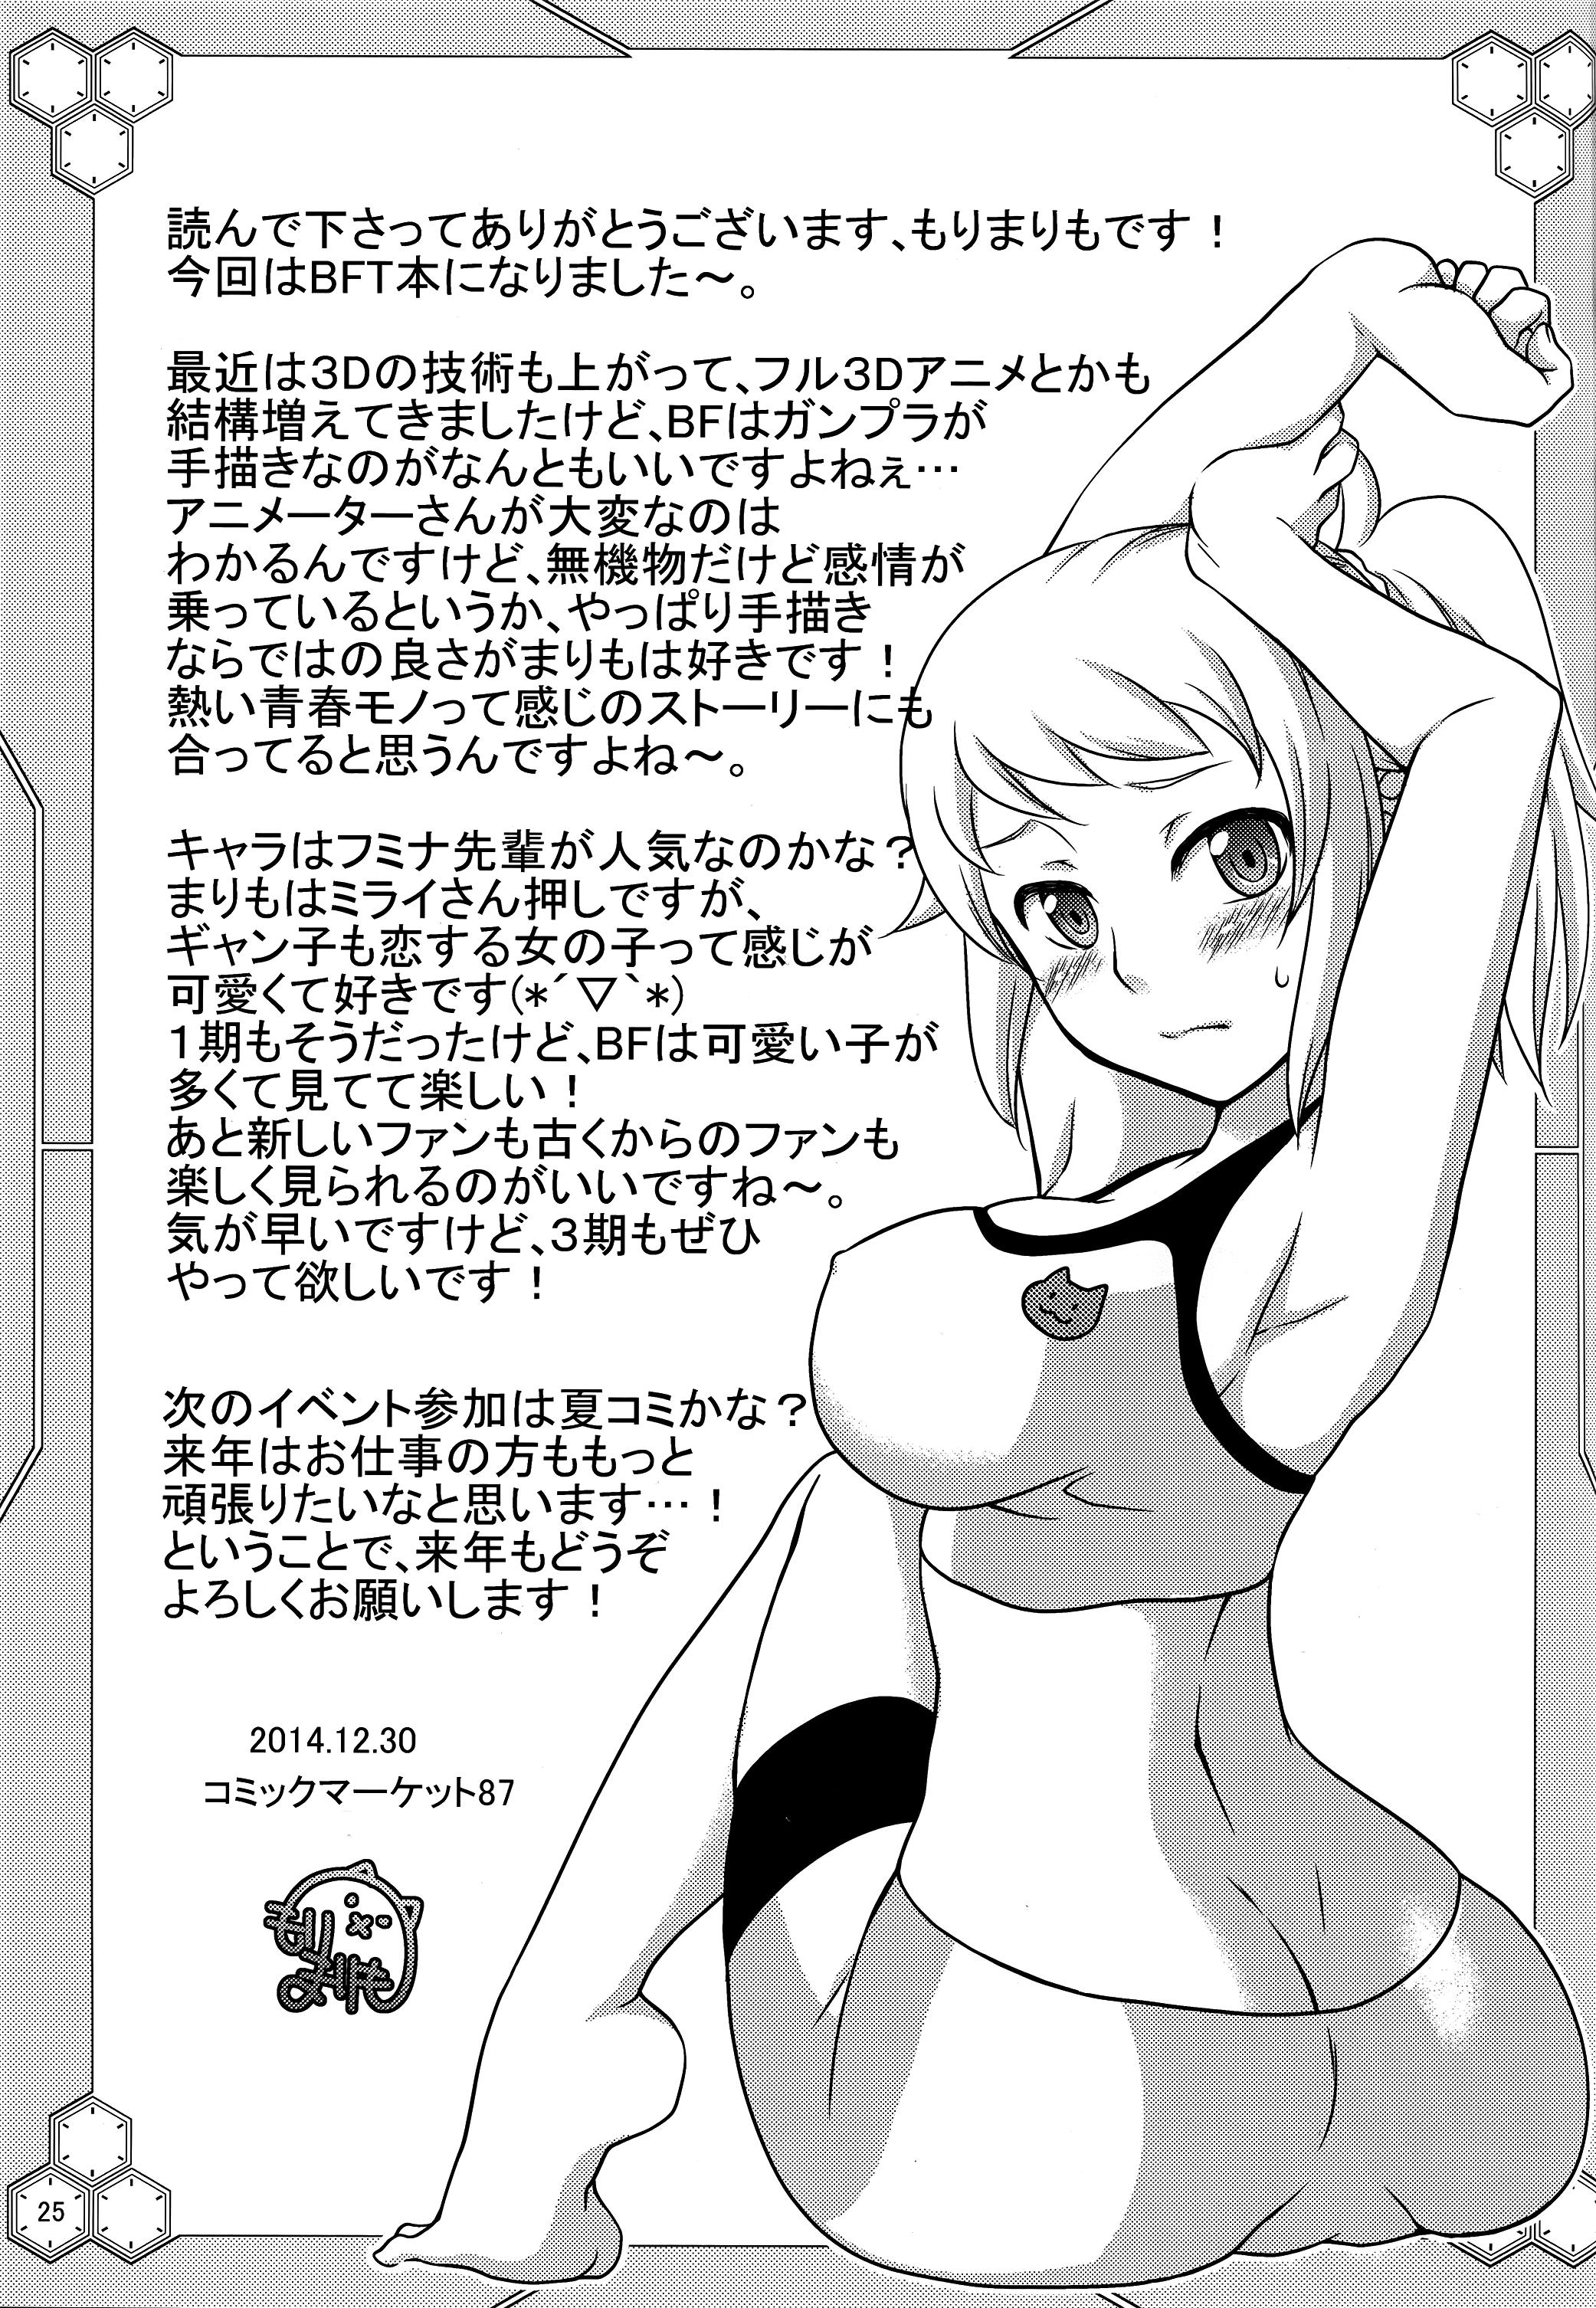 Pica FIELD?? POOLSIDE - Gundam build fighters try Hotwife - Page 25